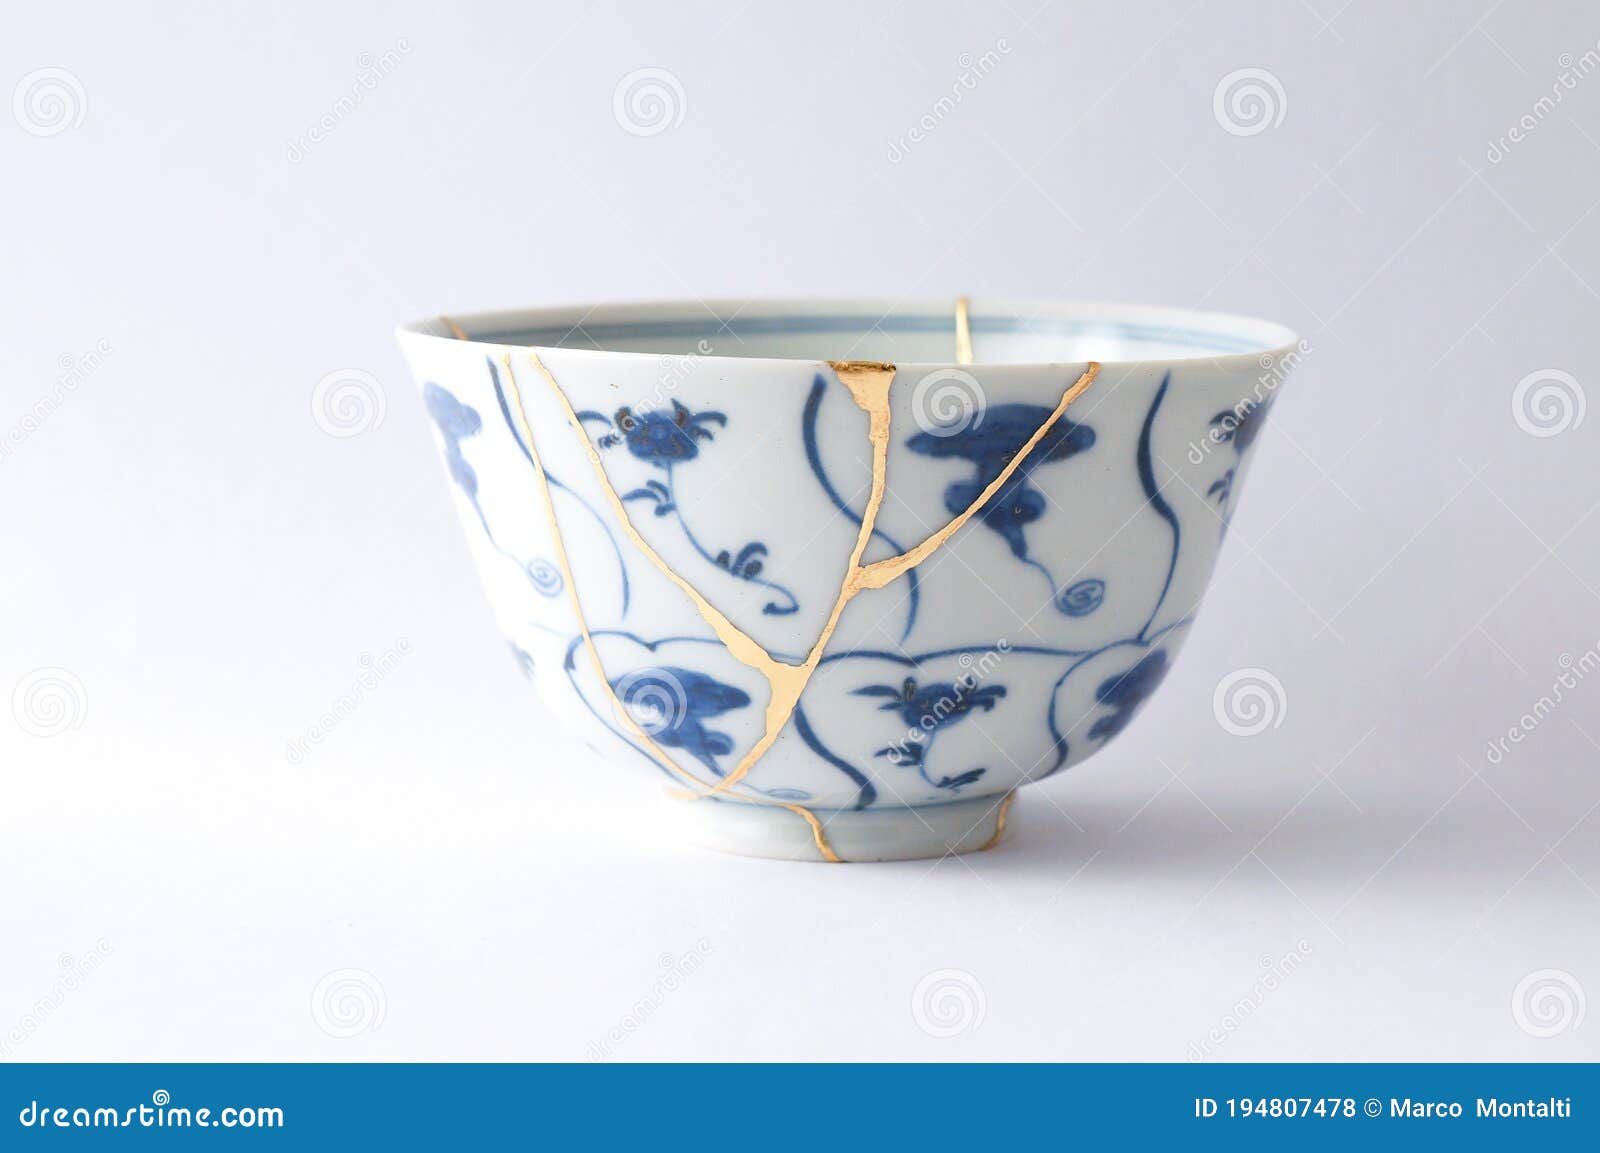 antique blue and white bowl restored with antique kintsugi real gold technique